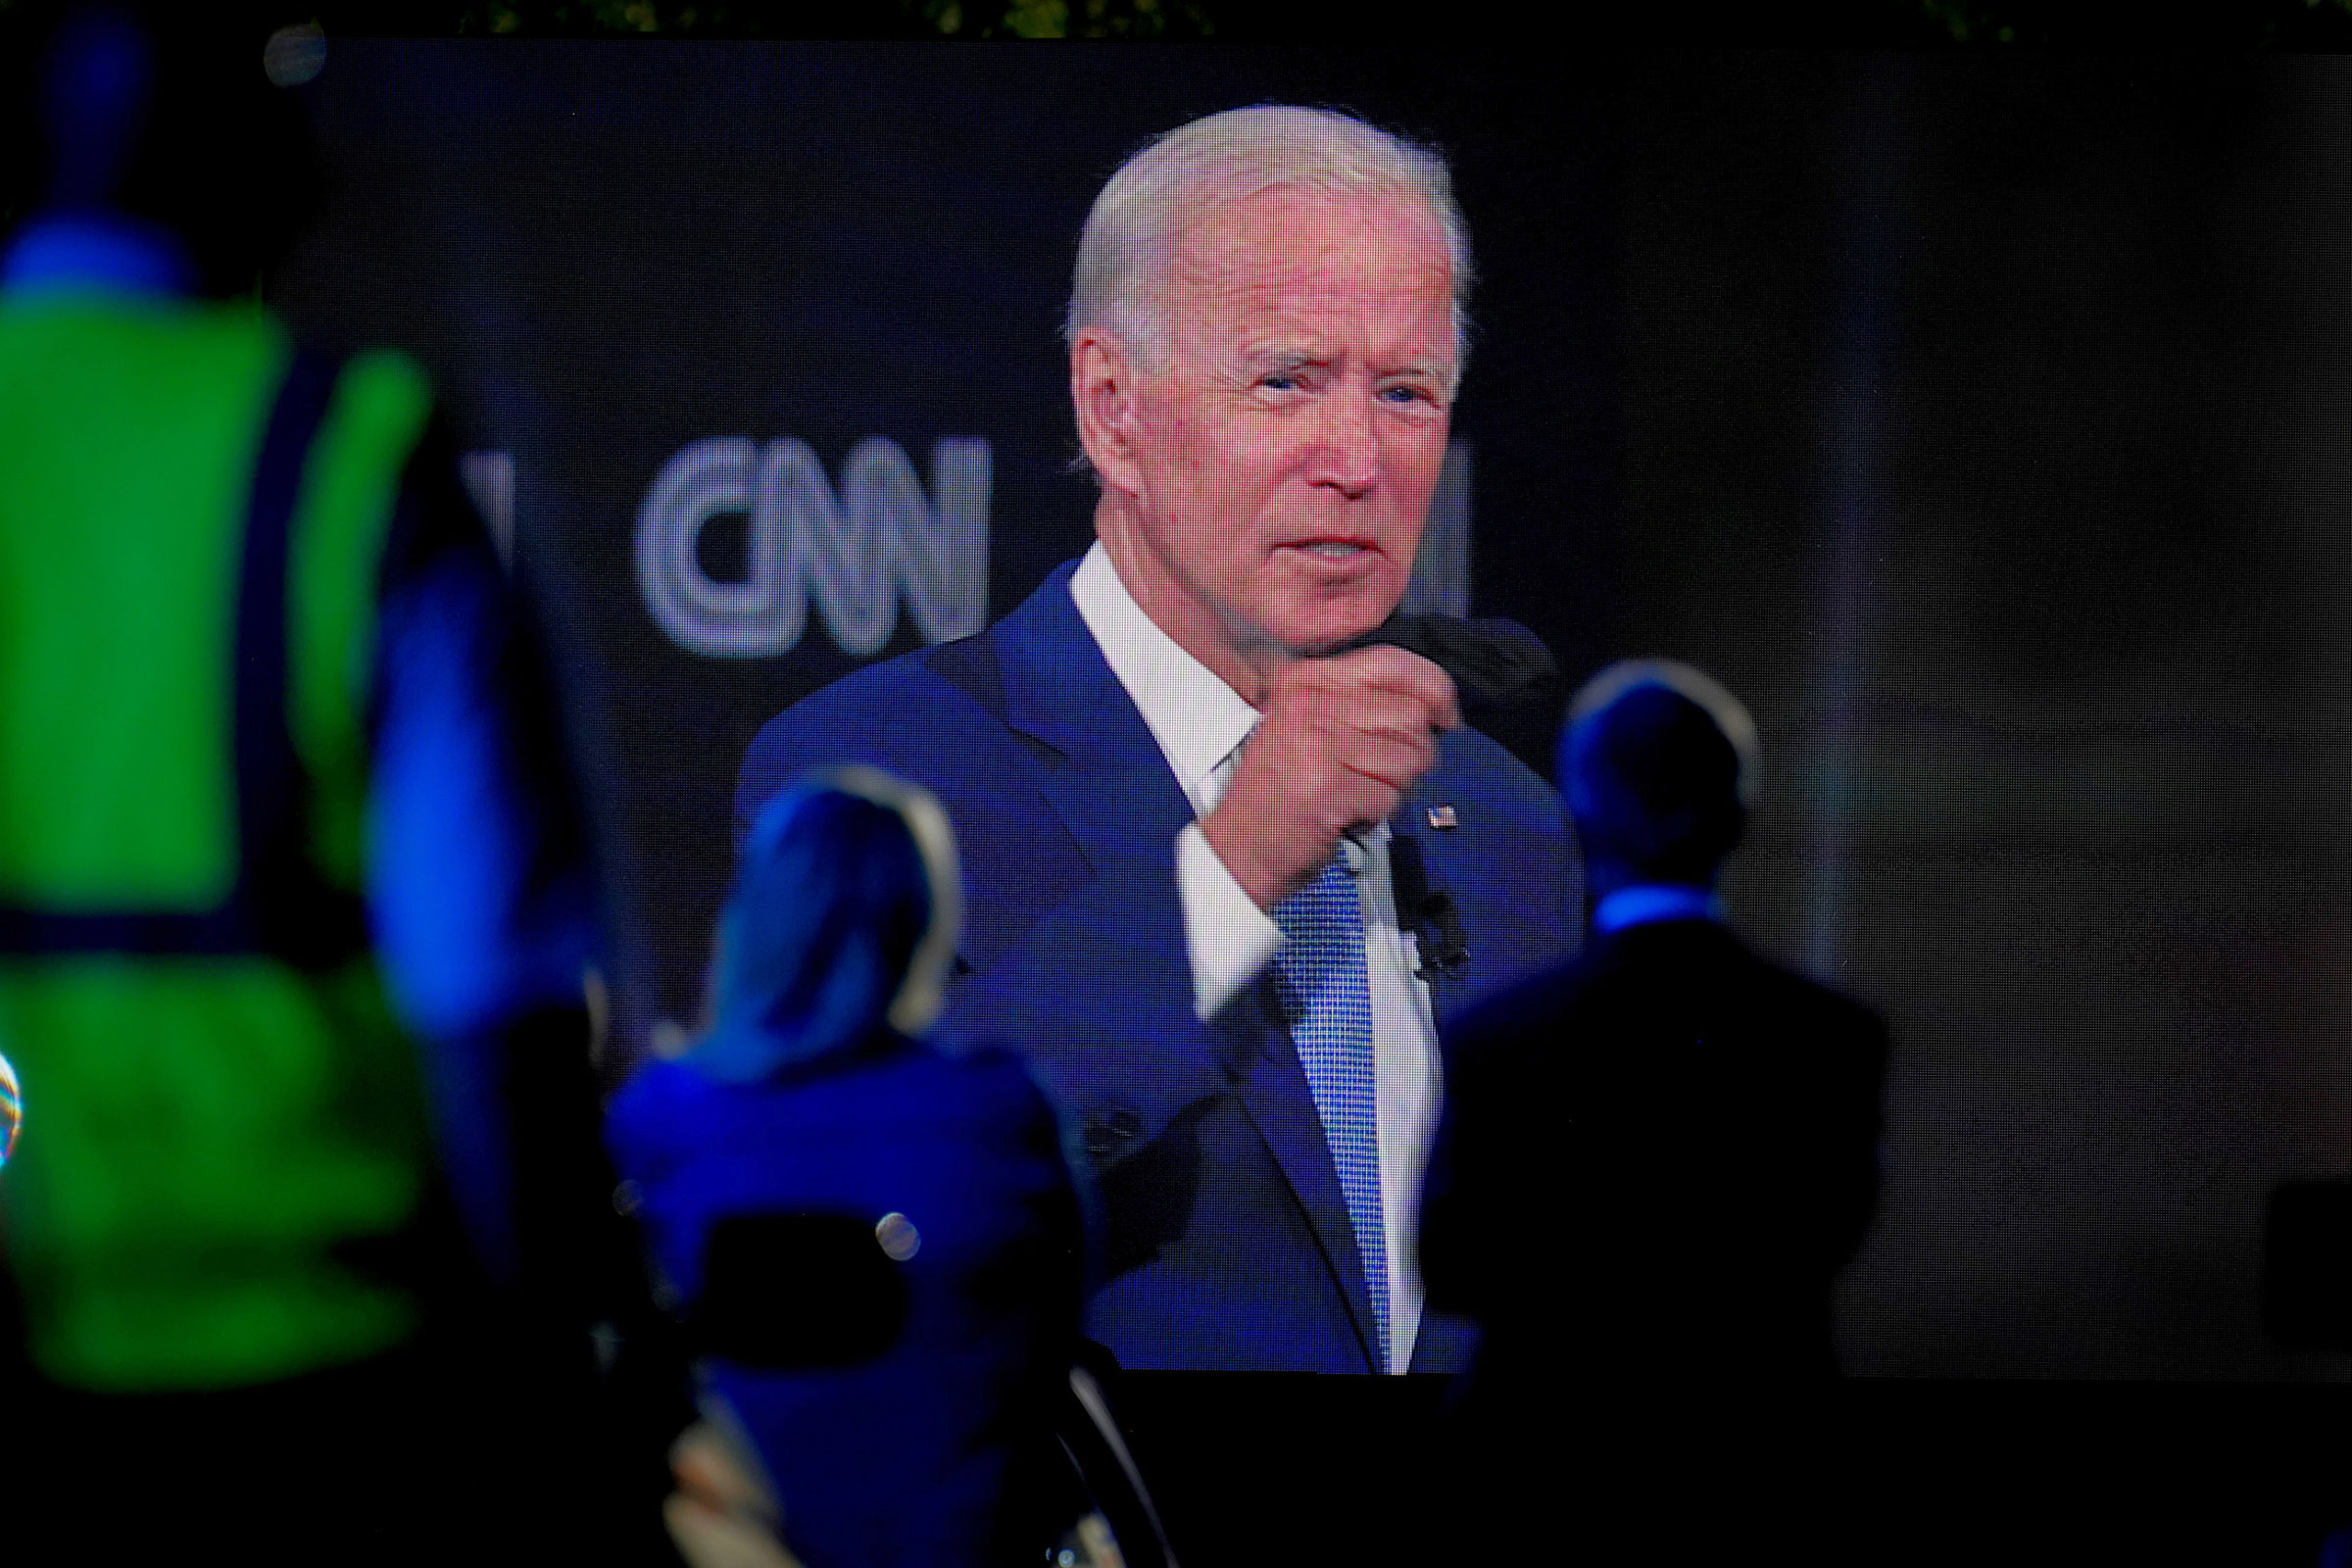 Democratic presidential nominee Joe Biden appears via video at a CNN town hall-style campaign event in Scranton, Pa., on Sept. 17, 2020. (Erin Schaff—The New York Times/Redux)